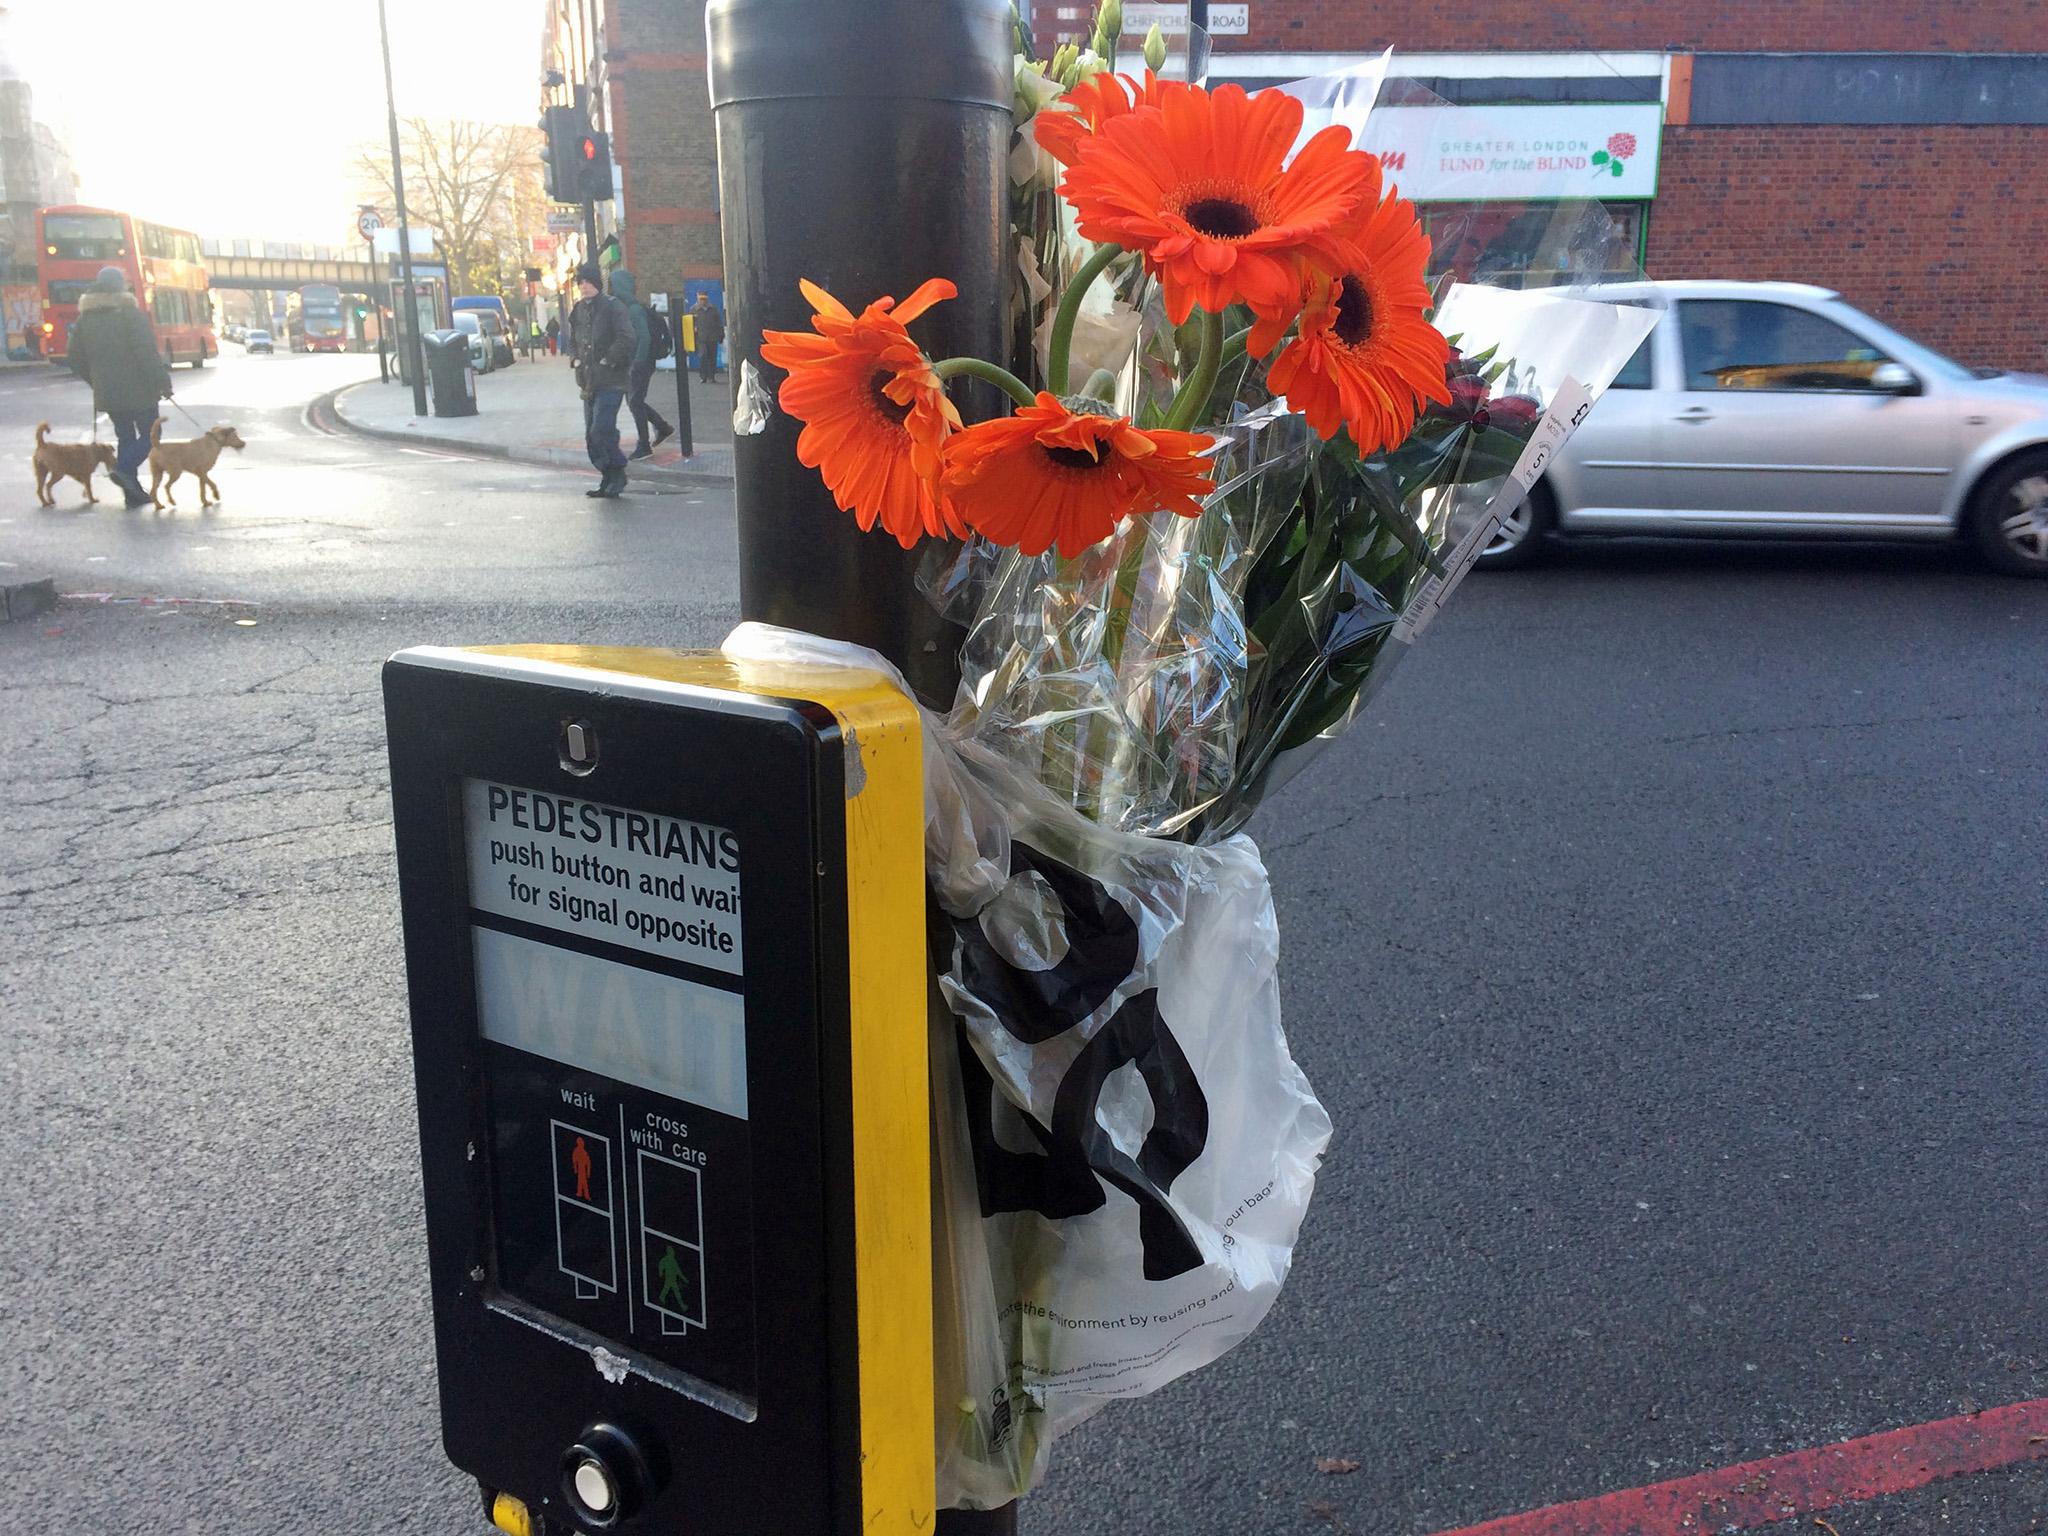 Flowers left at the scene for the woman in Tulse Hill, south London